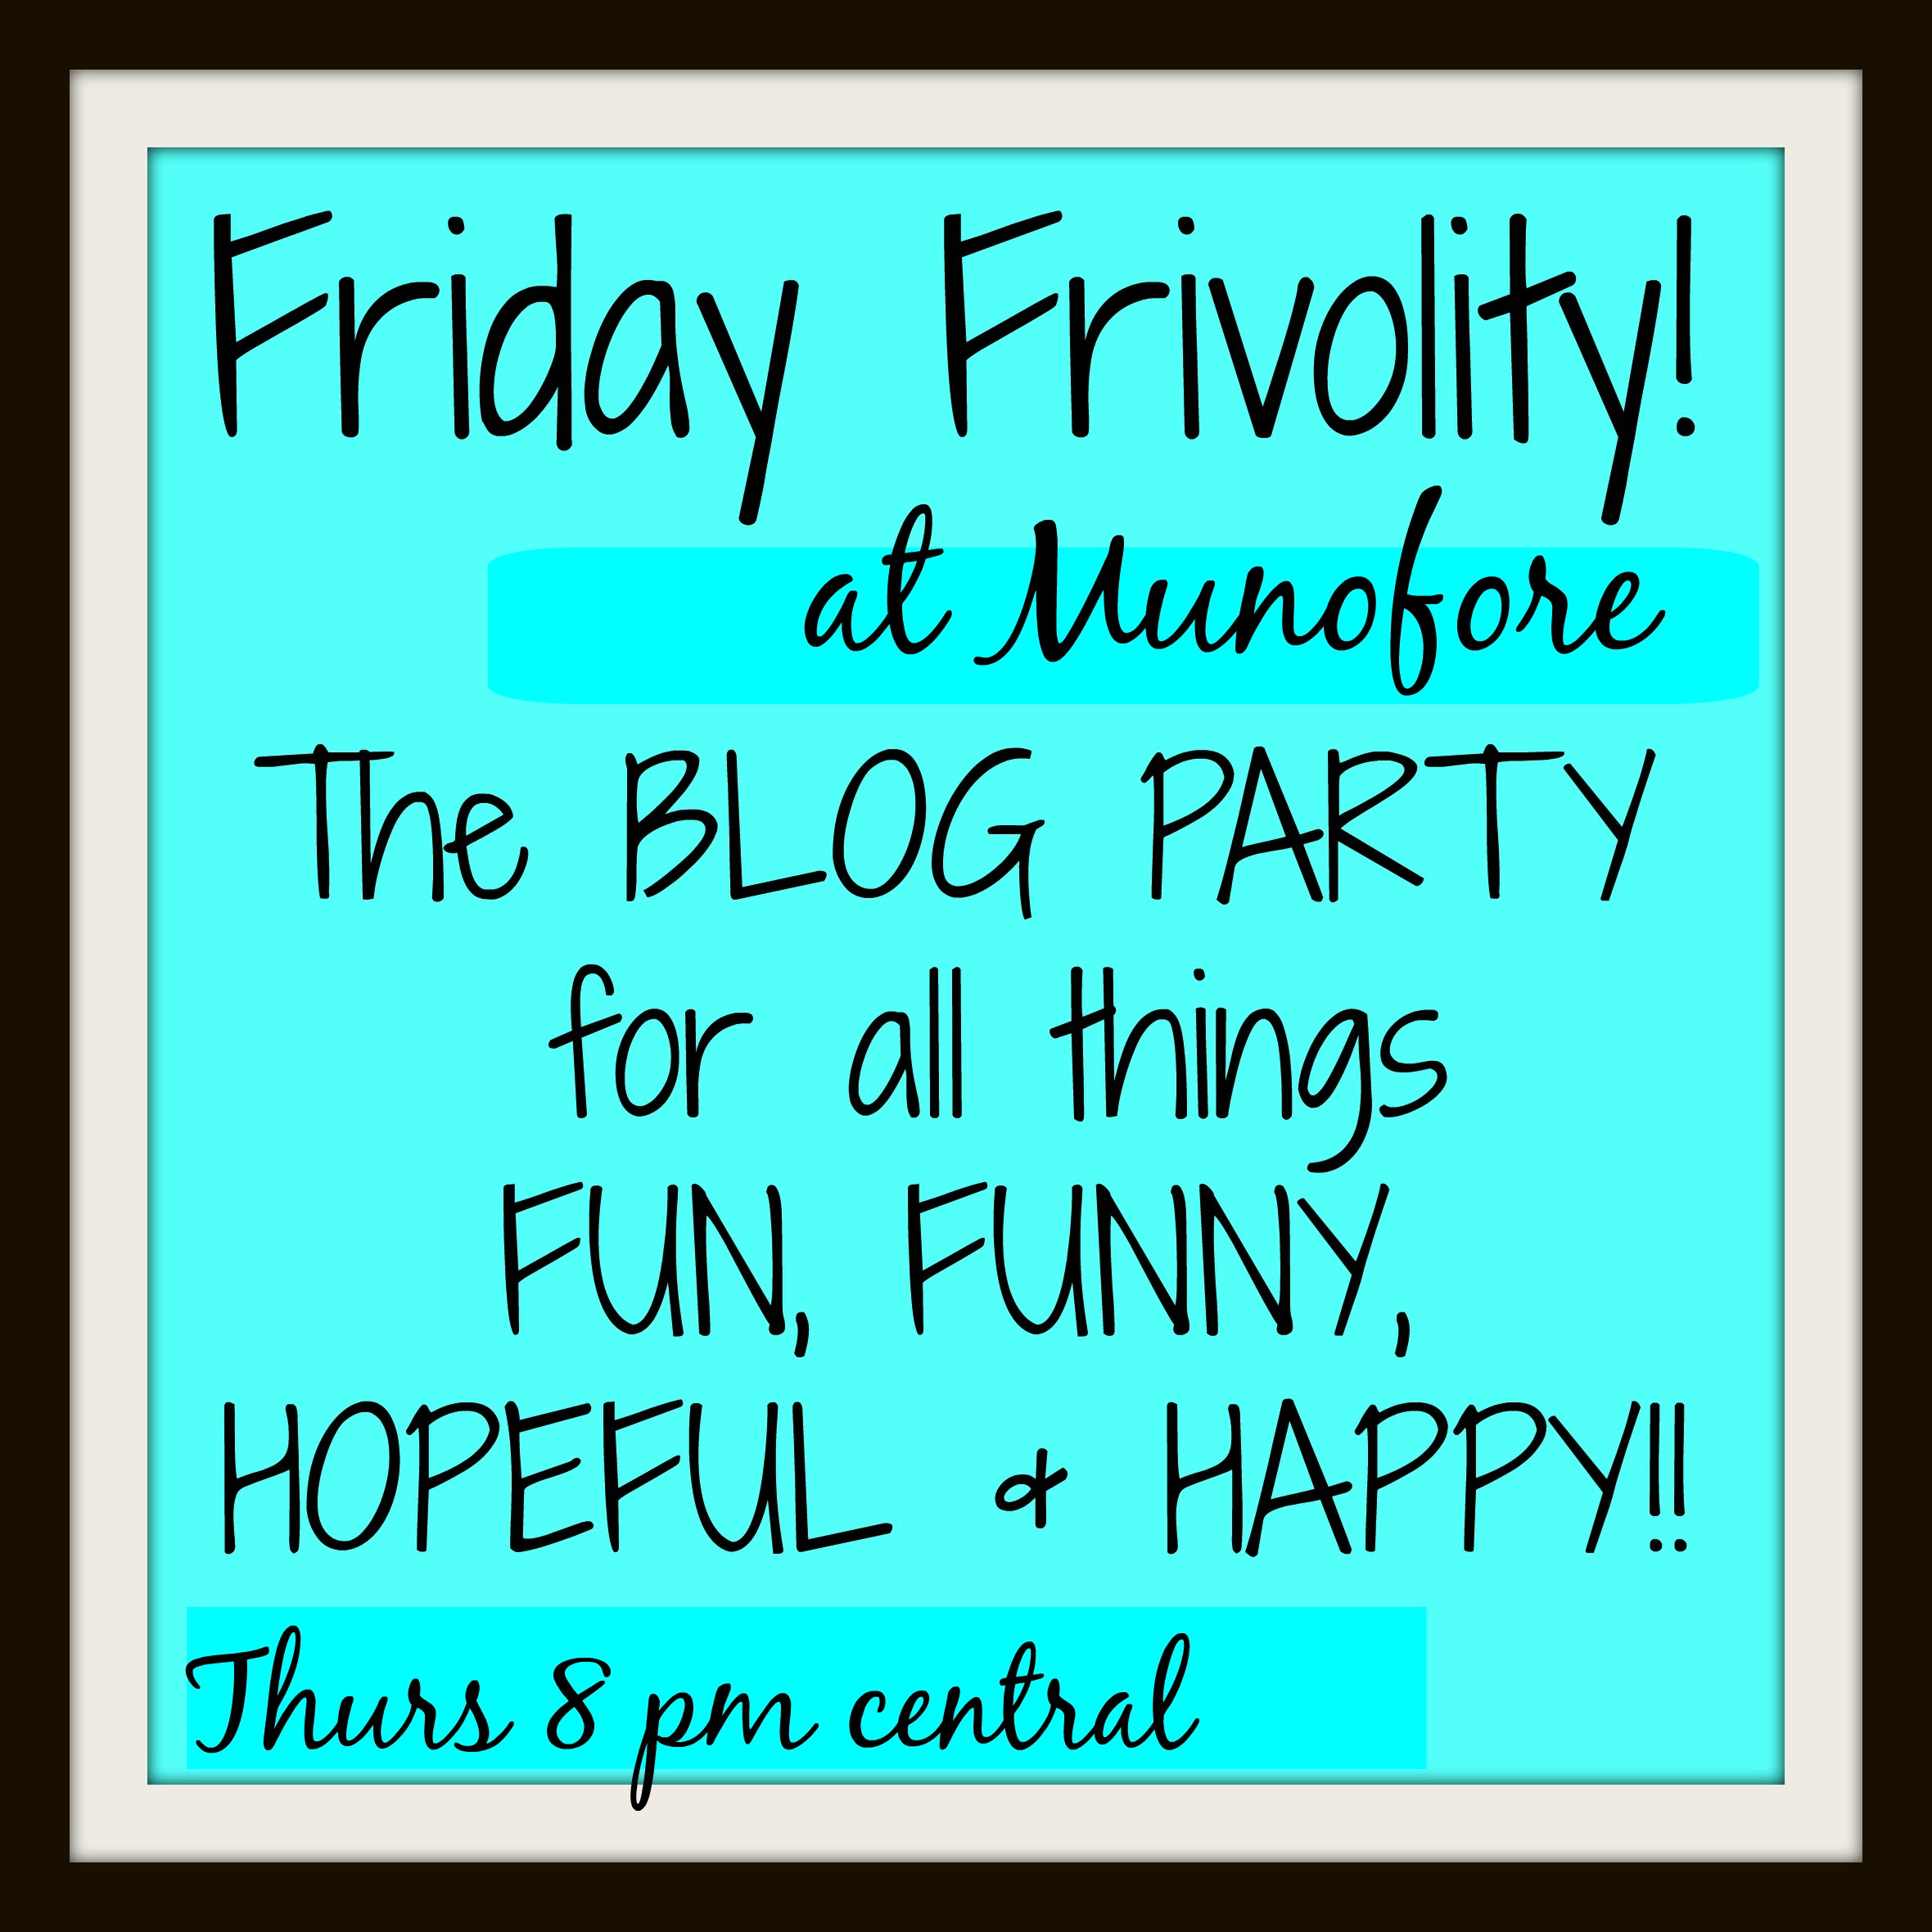 The blog party for all things Fun, funny, hopeful and happy